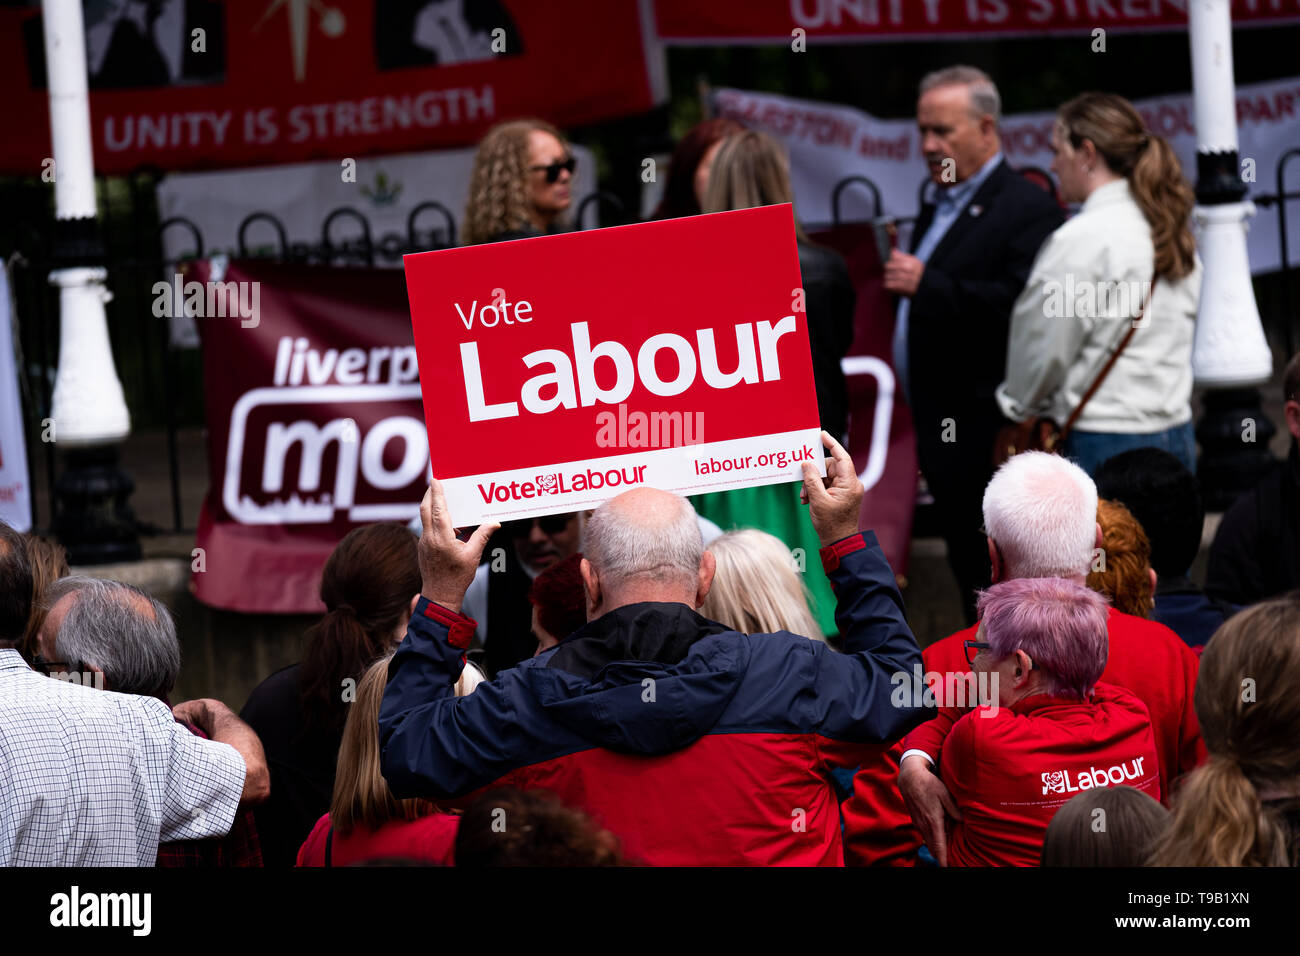 Bootle, UK. May 18, 2019. The leader of the opposition, Jeremy Corbyn MP, visits Bootle, Merseyside in the north west of England, on Saturday, May 18, 2019, as part of a campaign trail ahead of the upcoming European Parliament elections. Credit: Christopher Middleton/Alamy Live News Stock Photo